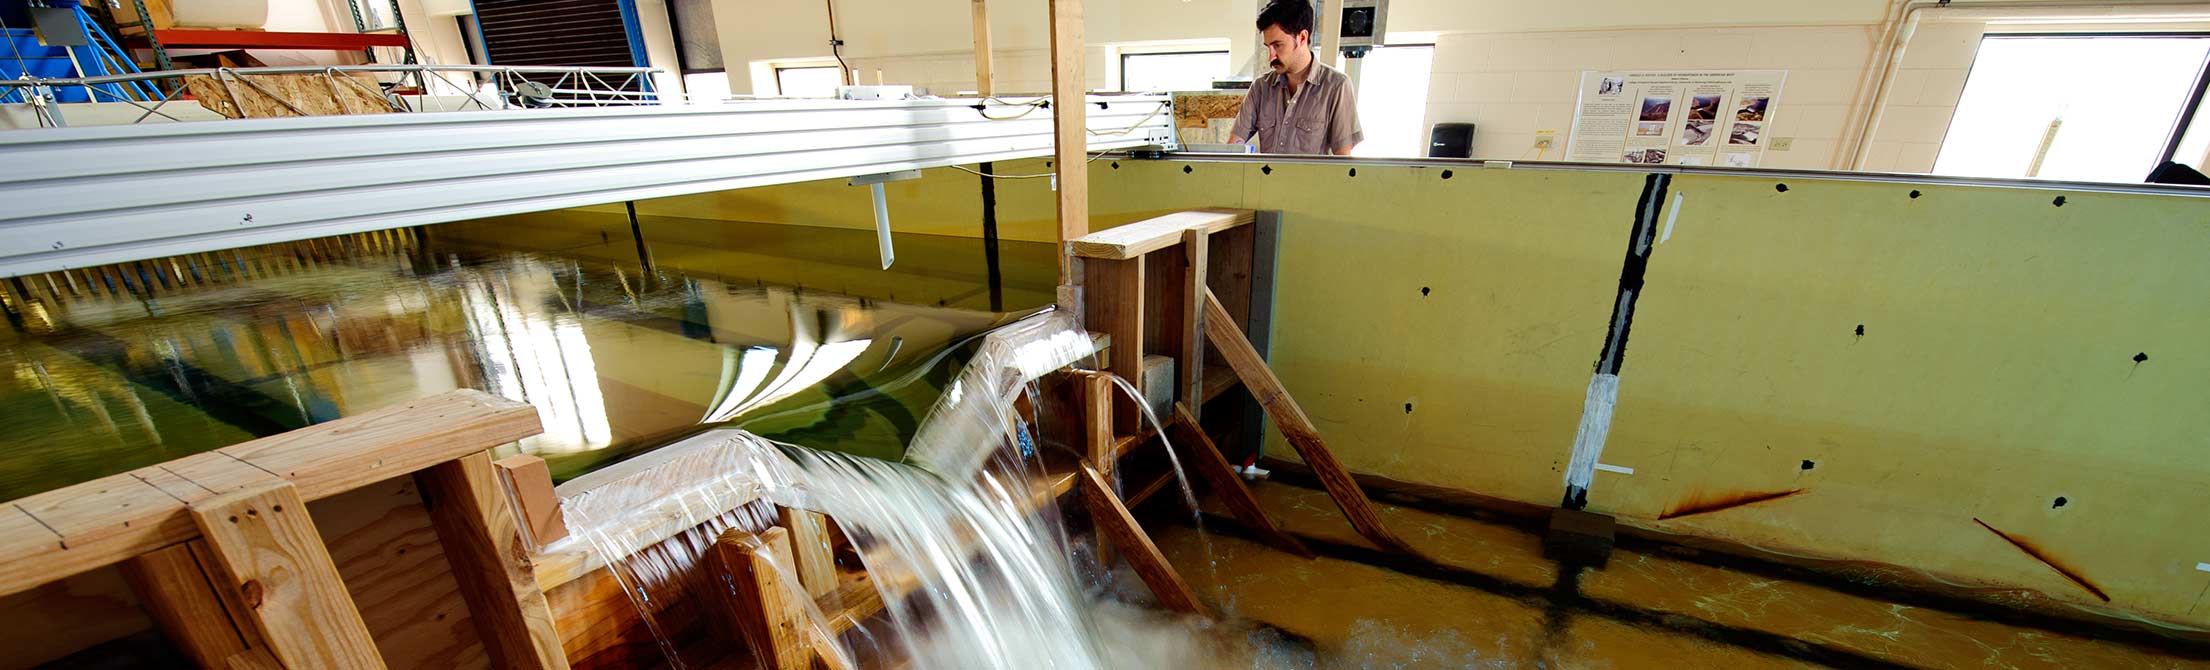 Man watches water flow in engineering resources lab